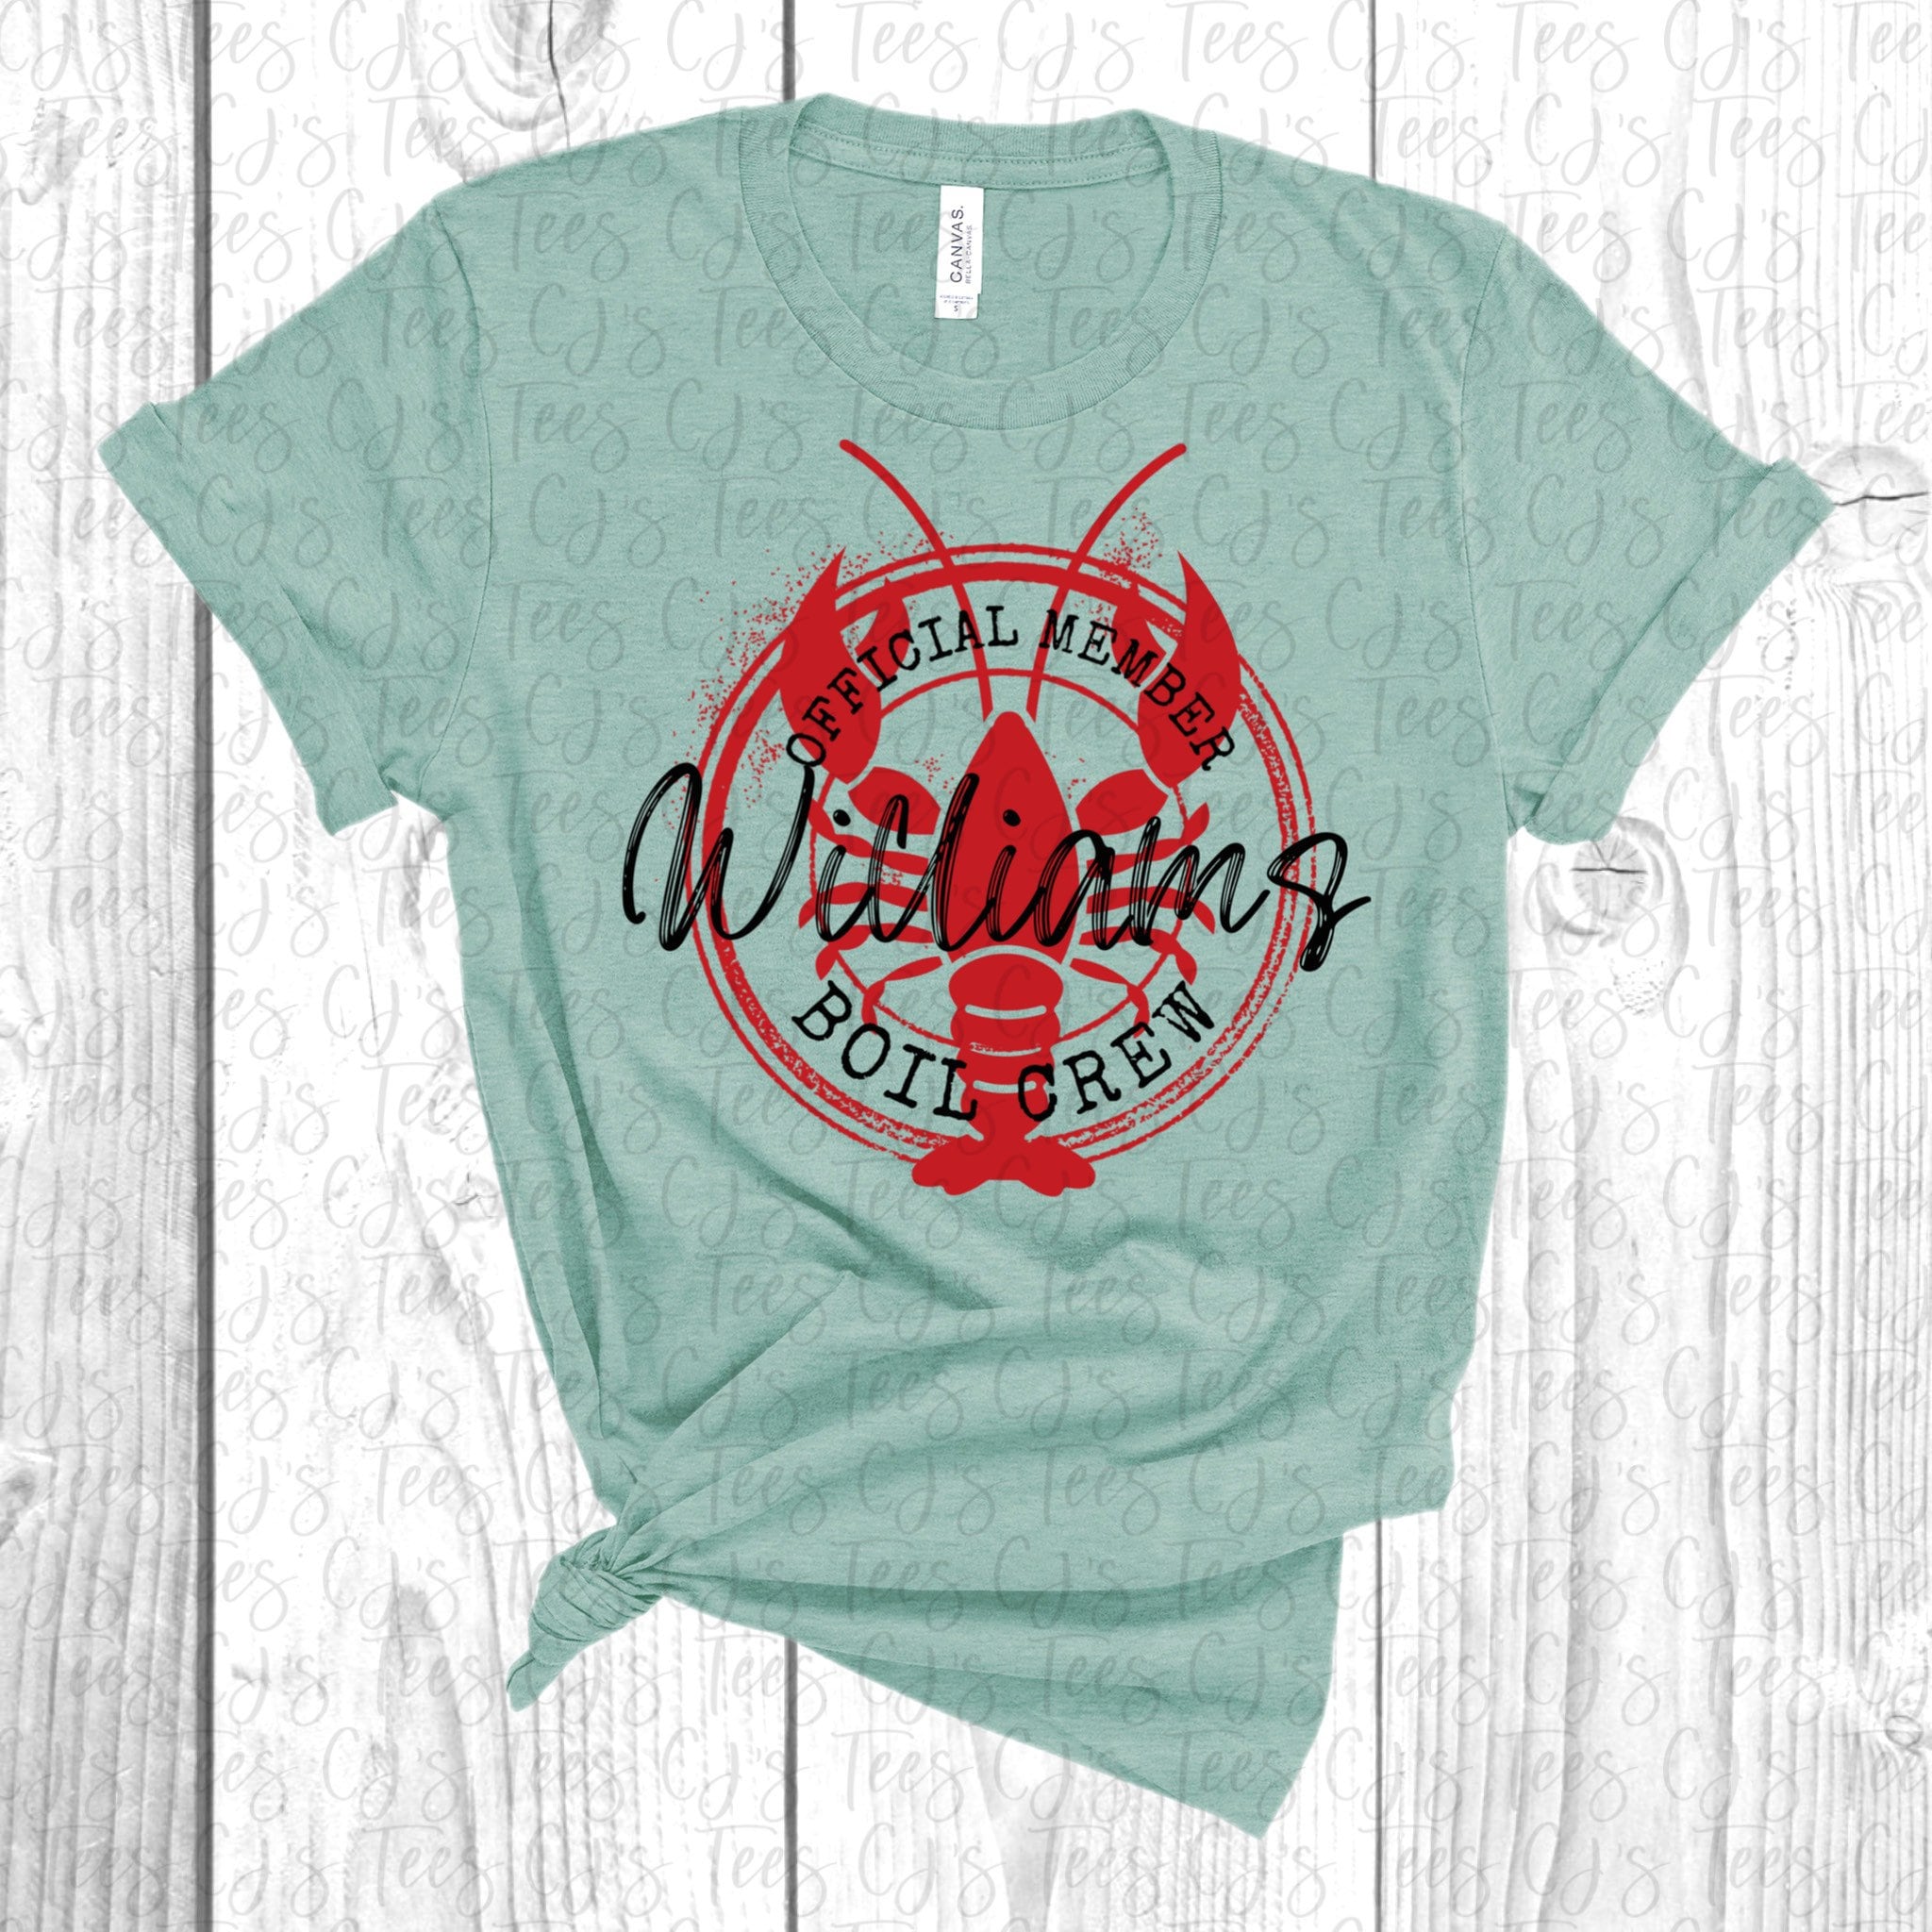 Boil Crew, Official MEMBER, Personalized Crawfish Boil Shirt, Family Matching Boil Crew Shirts